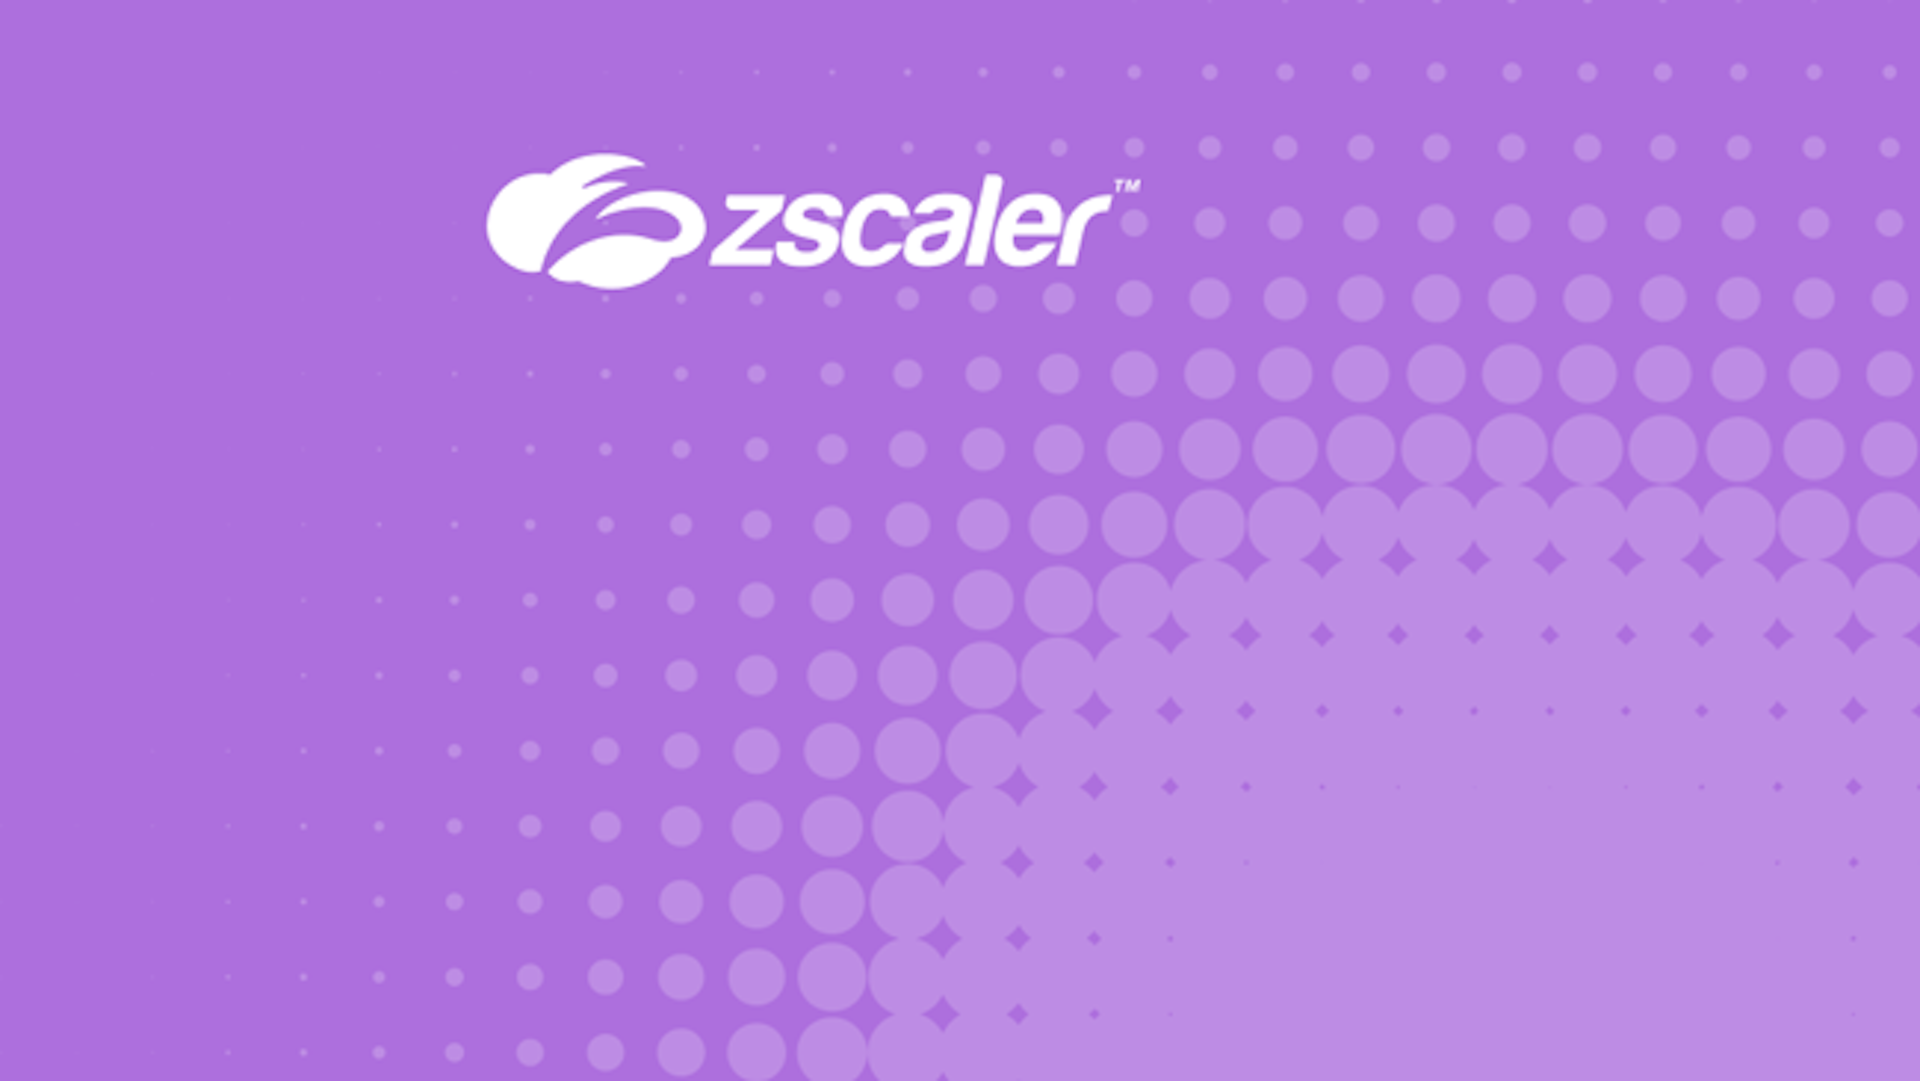 Zscaler Launches New Innovations to Improve Best-in-Class DNS Security